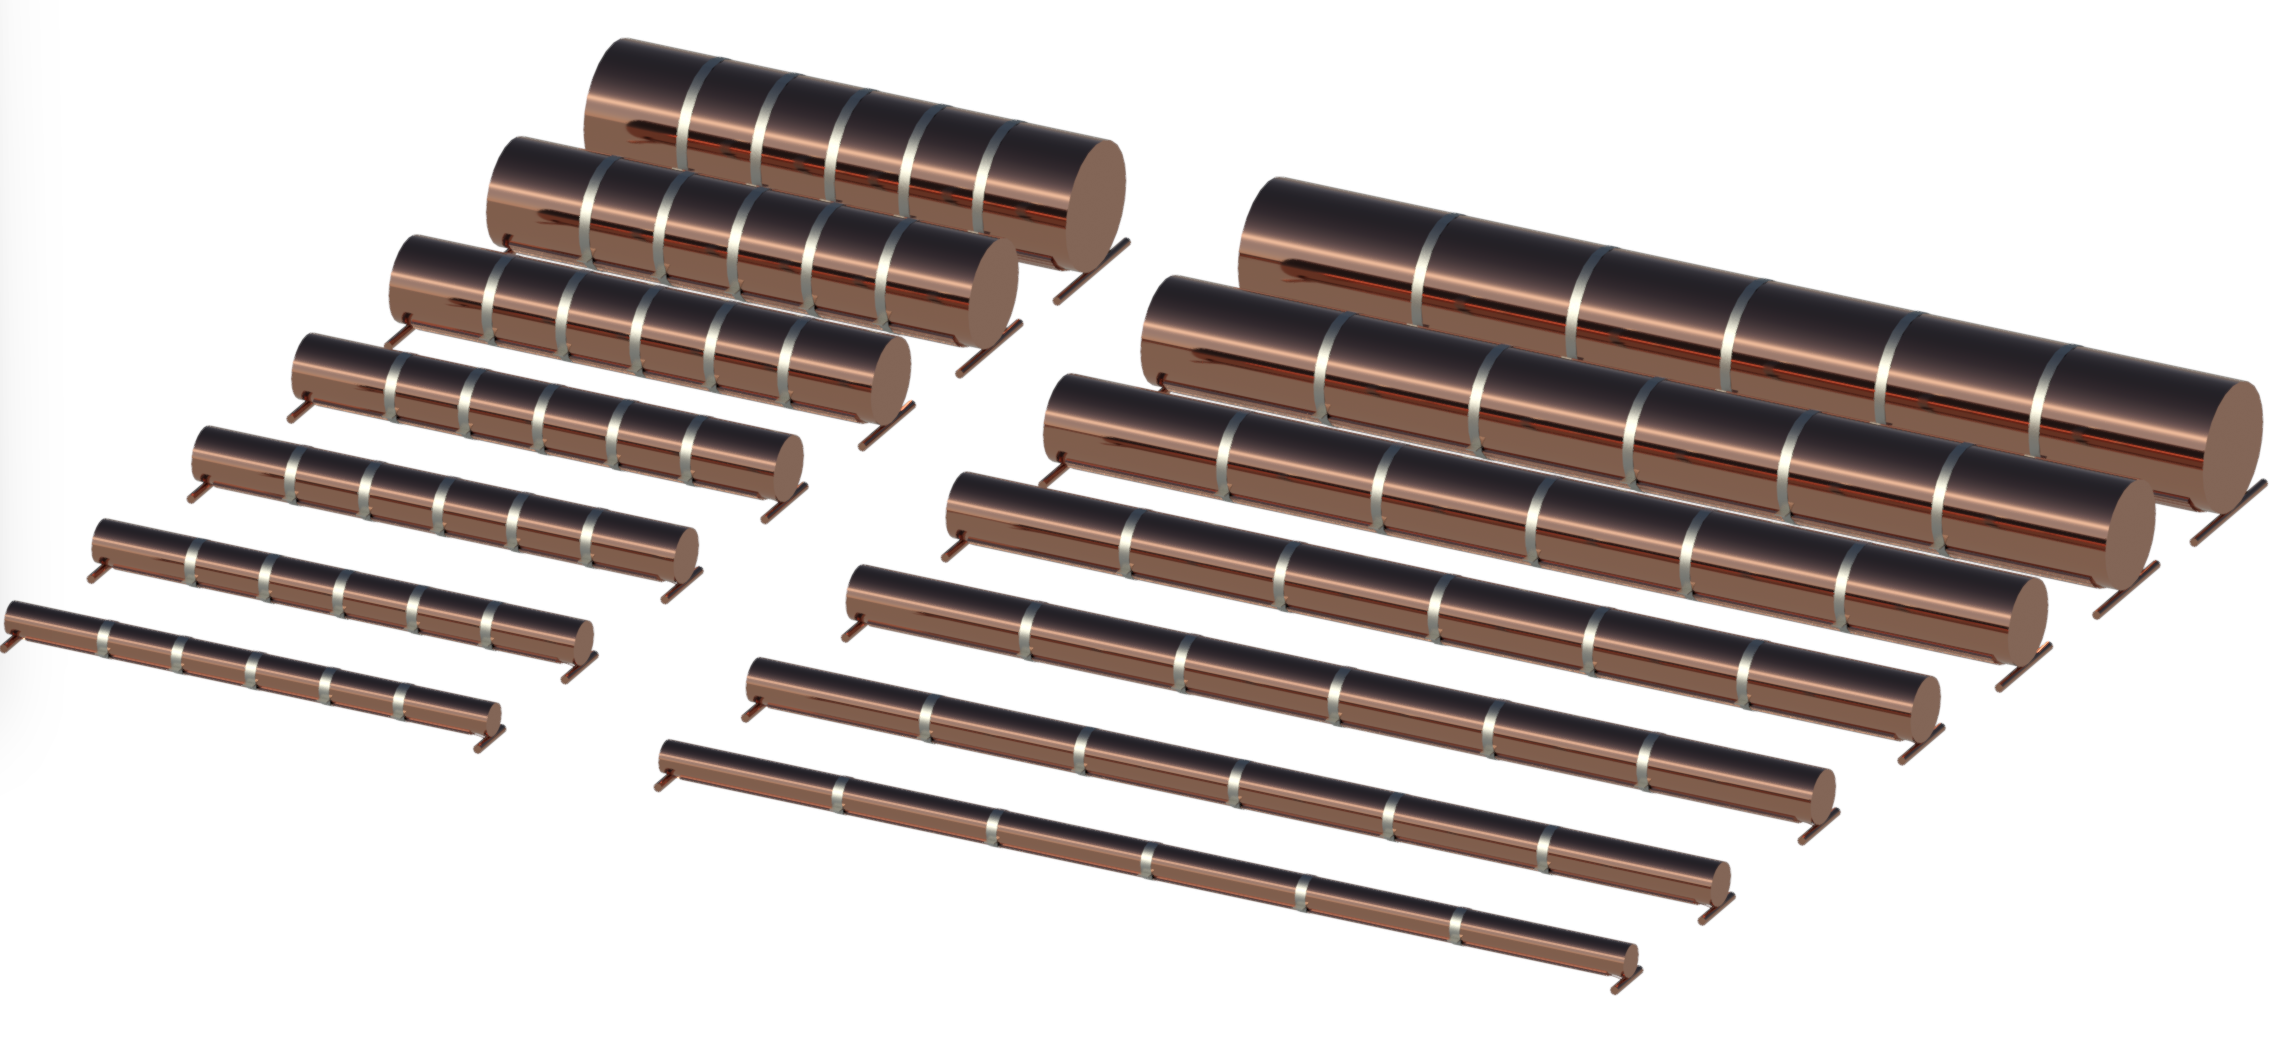 Render of 14 copper heat exchanges varying in width and length